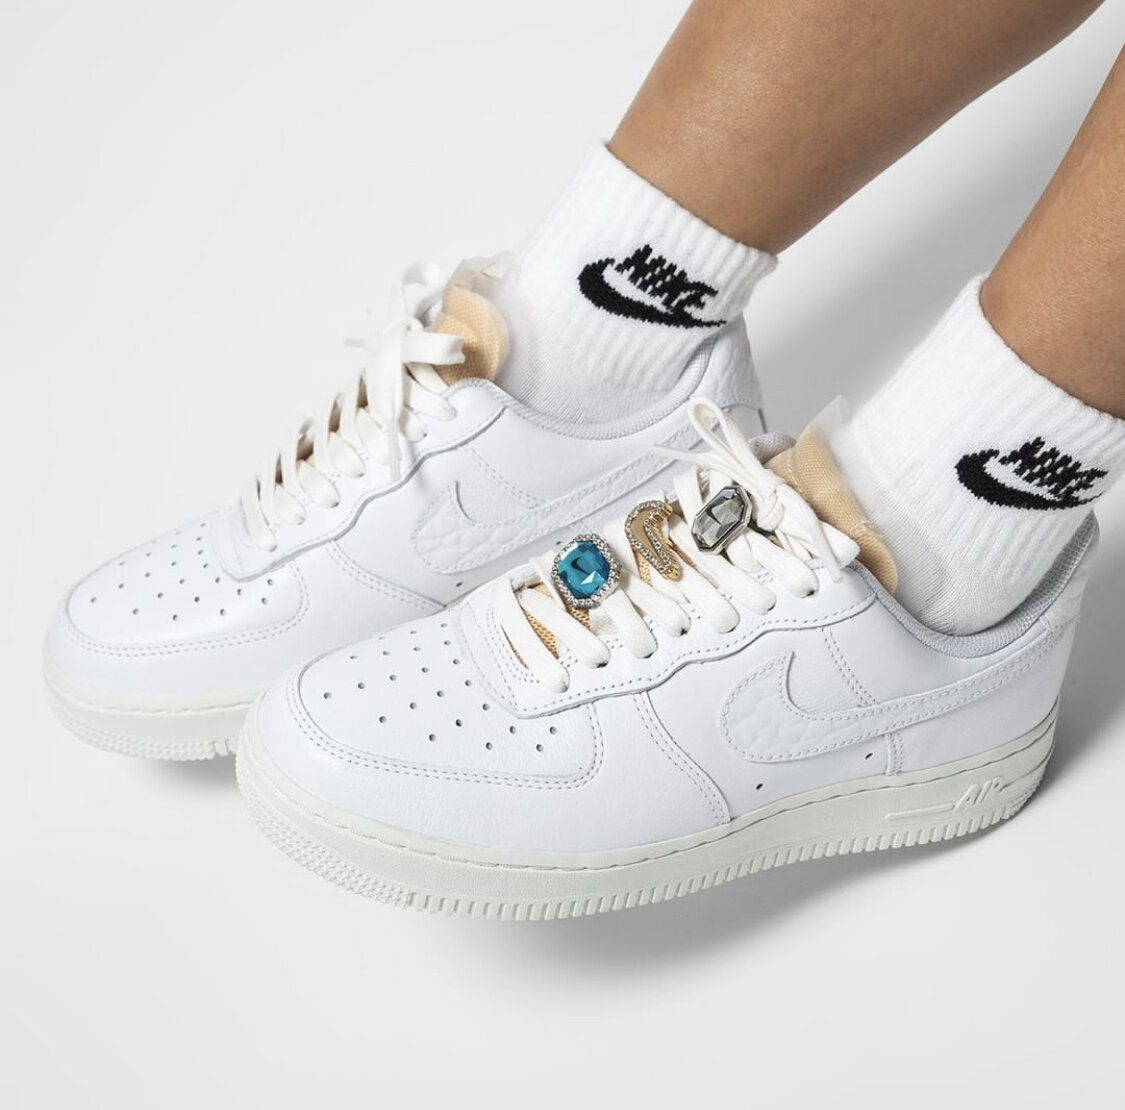 nike air force 1 bedazzled